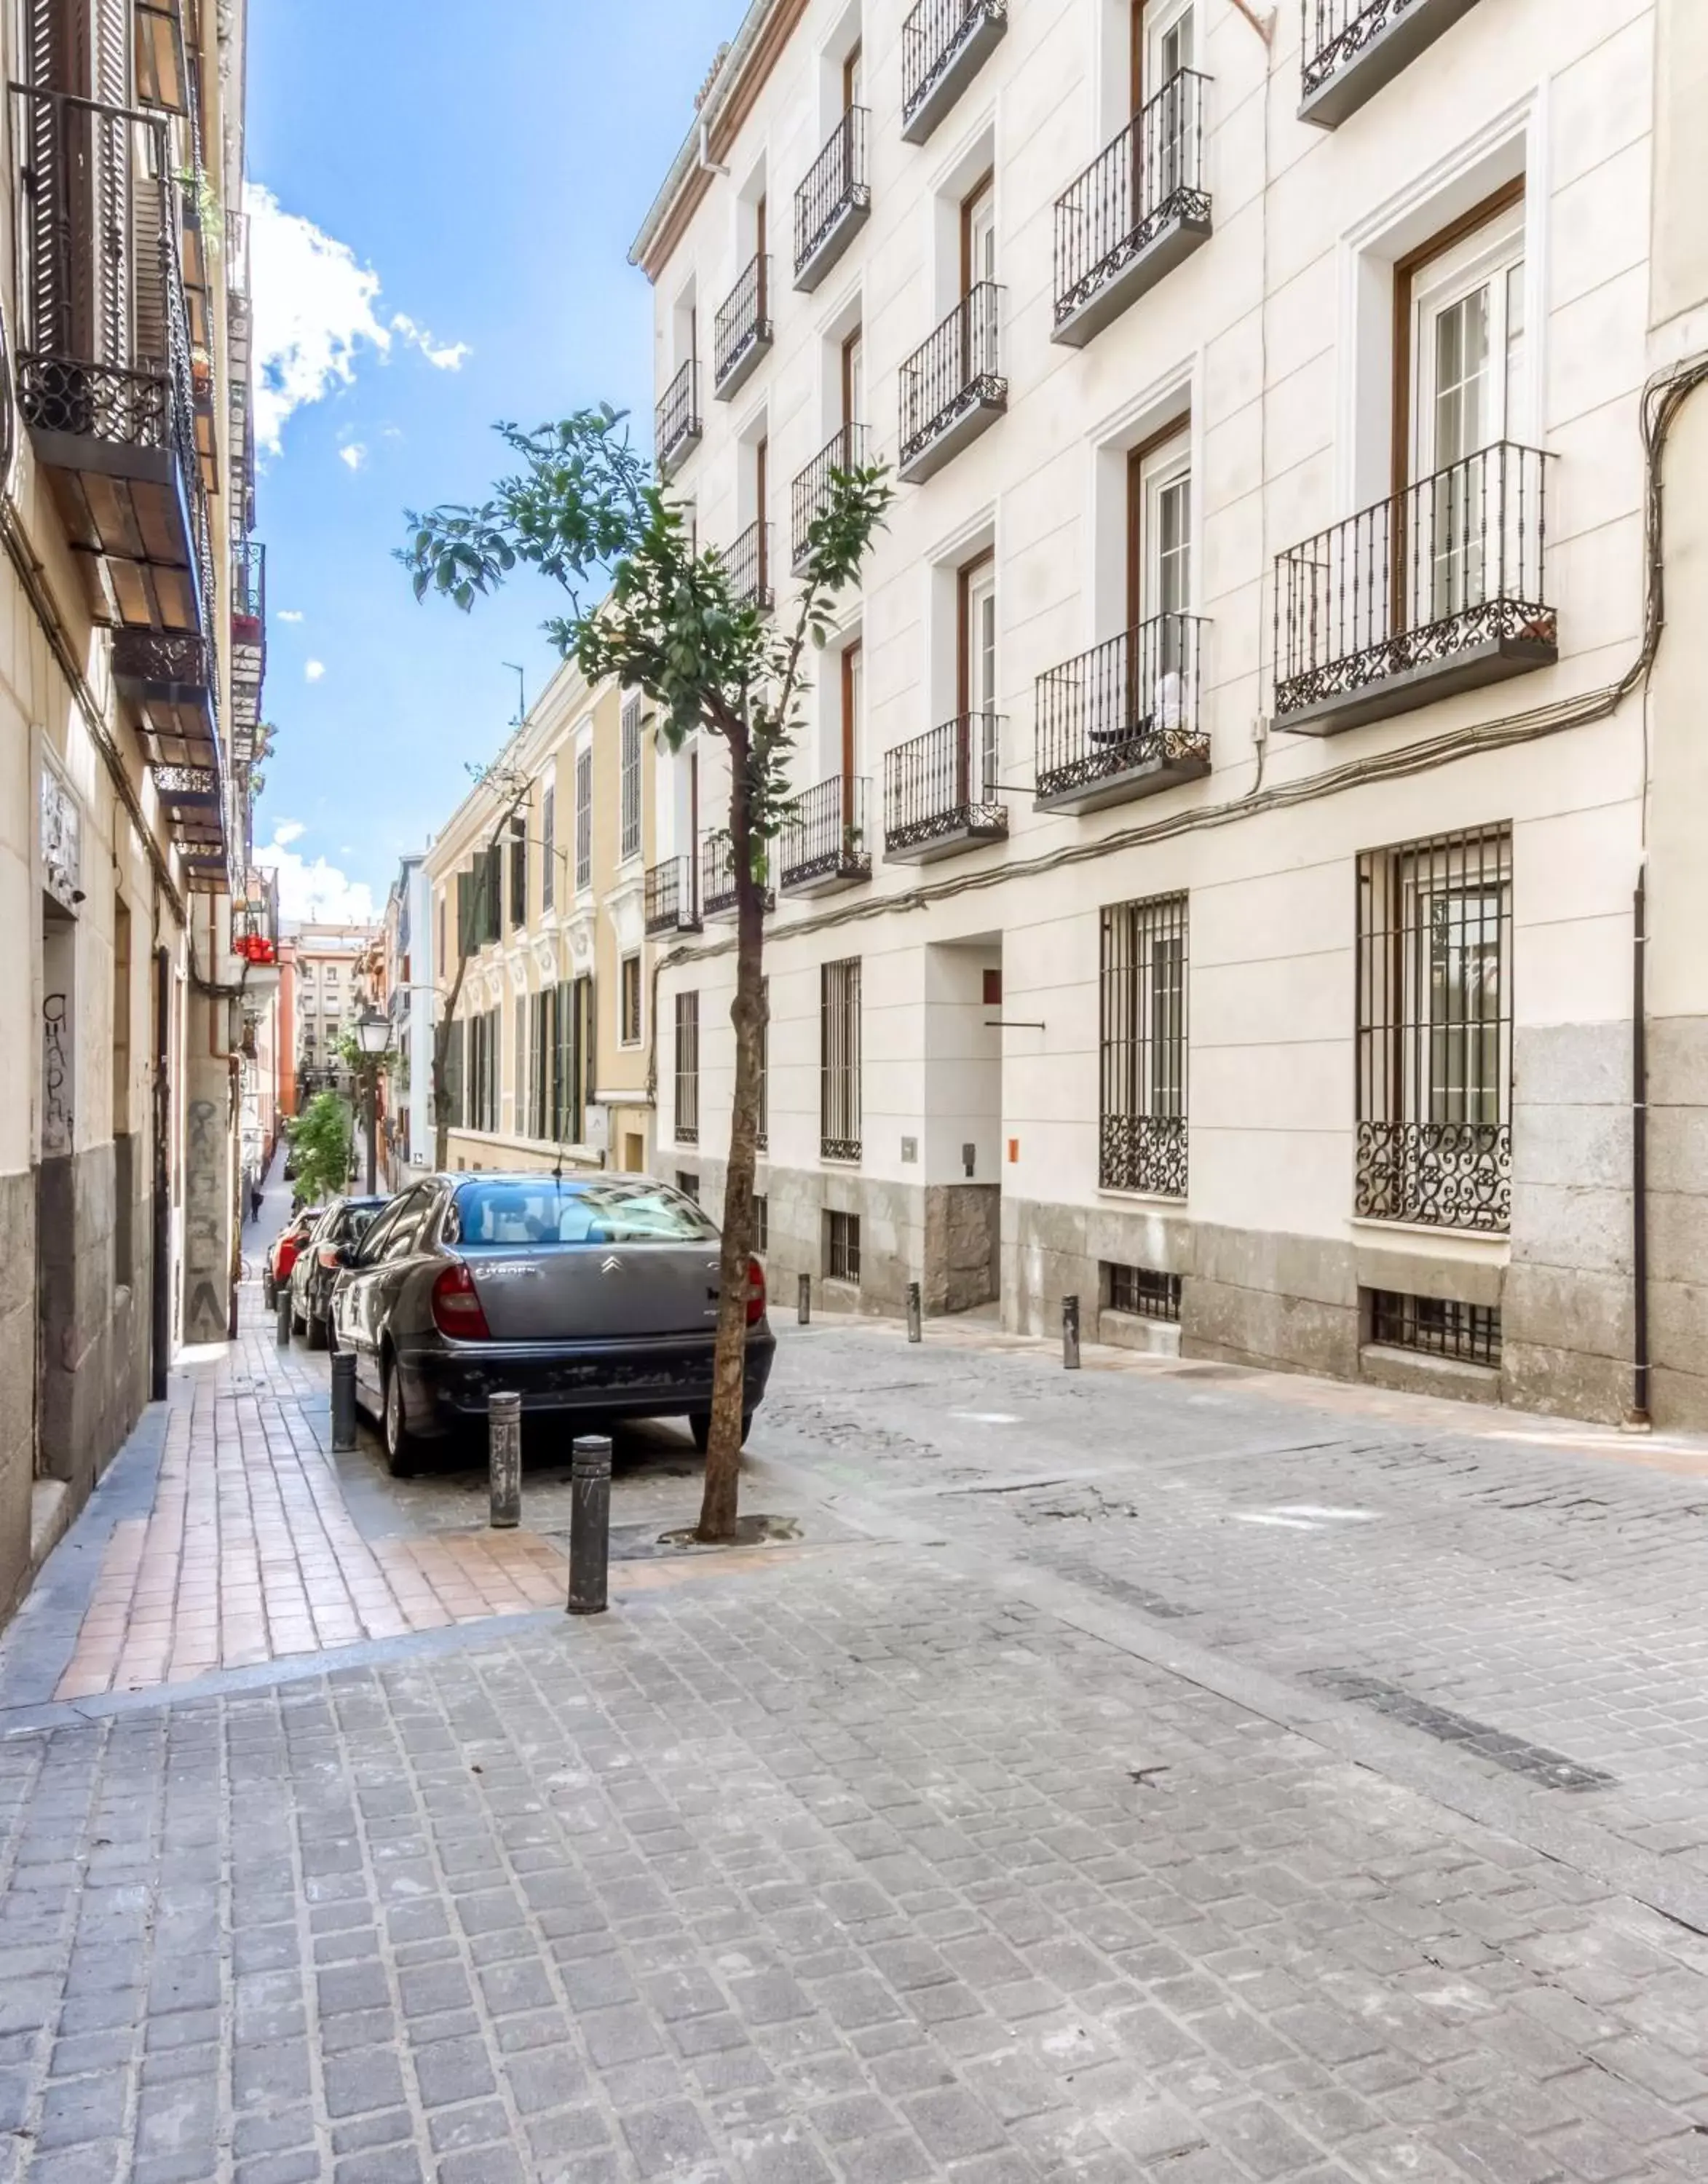 Property building in limehome Madrid Calle de la Madera - Digital Access